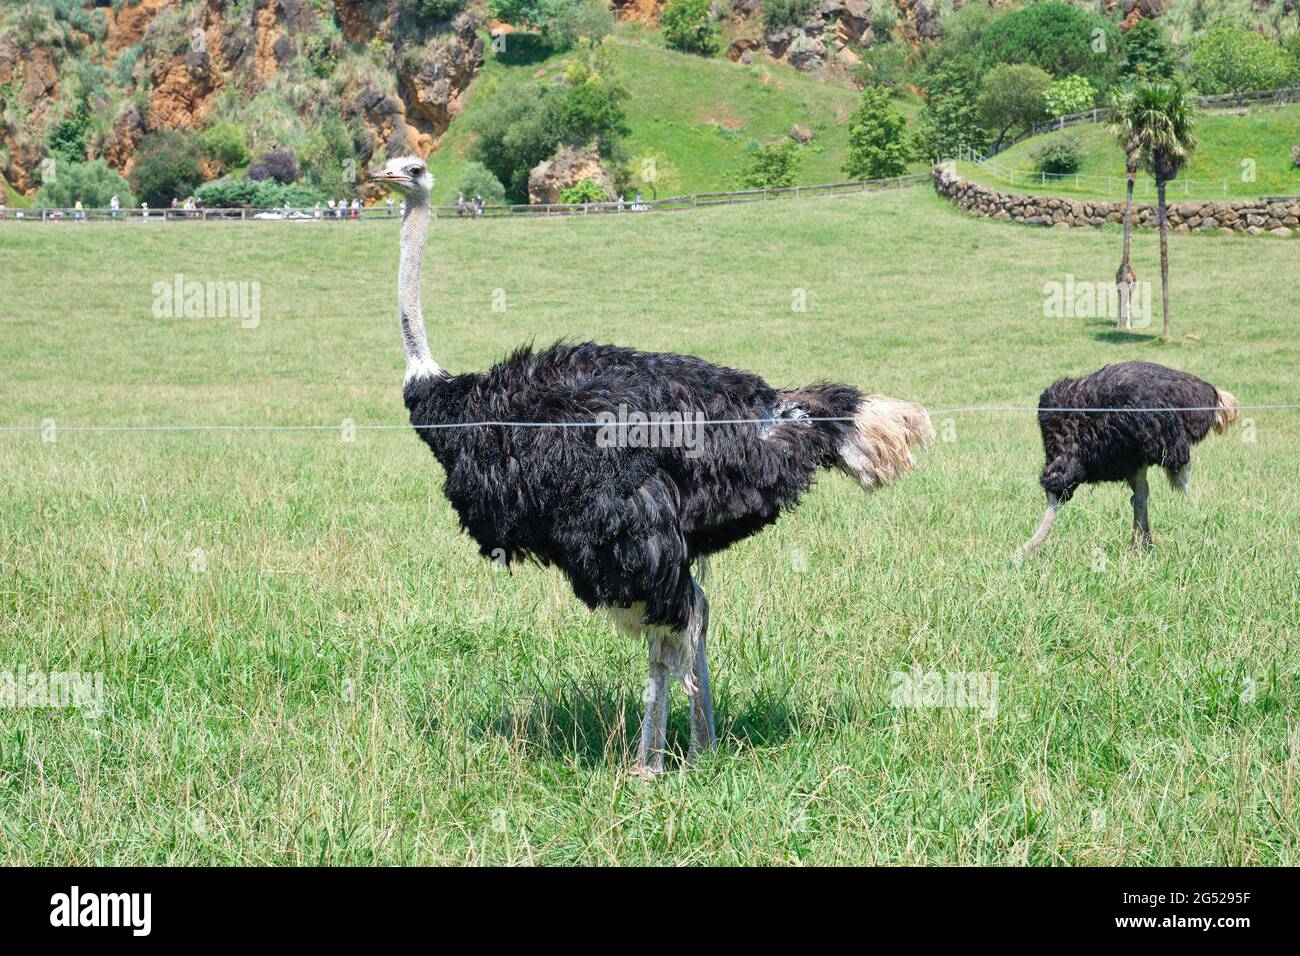 Ostriches in Cabarceno Natural Park in Cantabria, Spain. Stock Photo